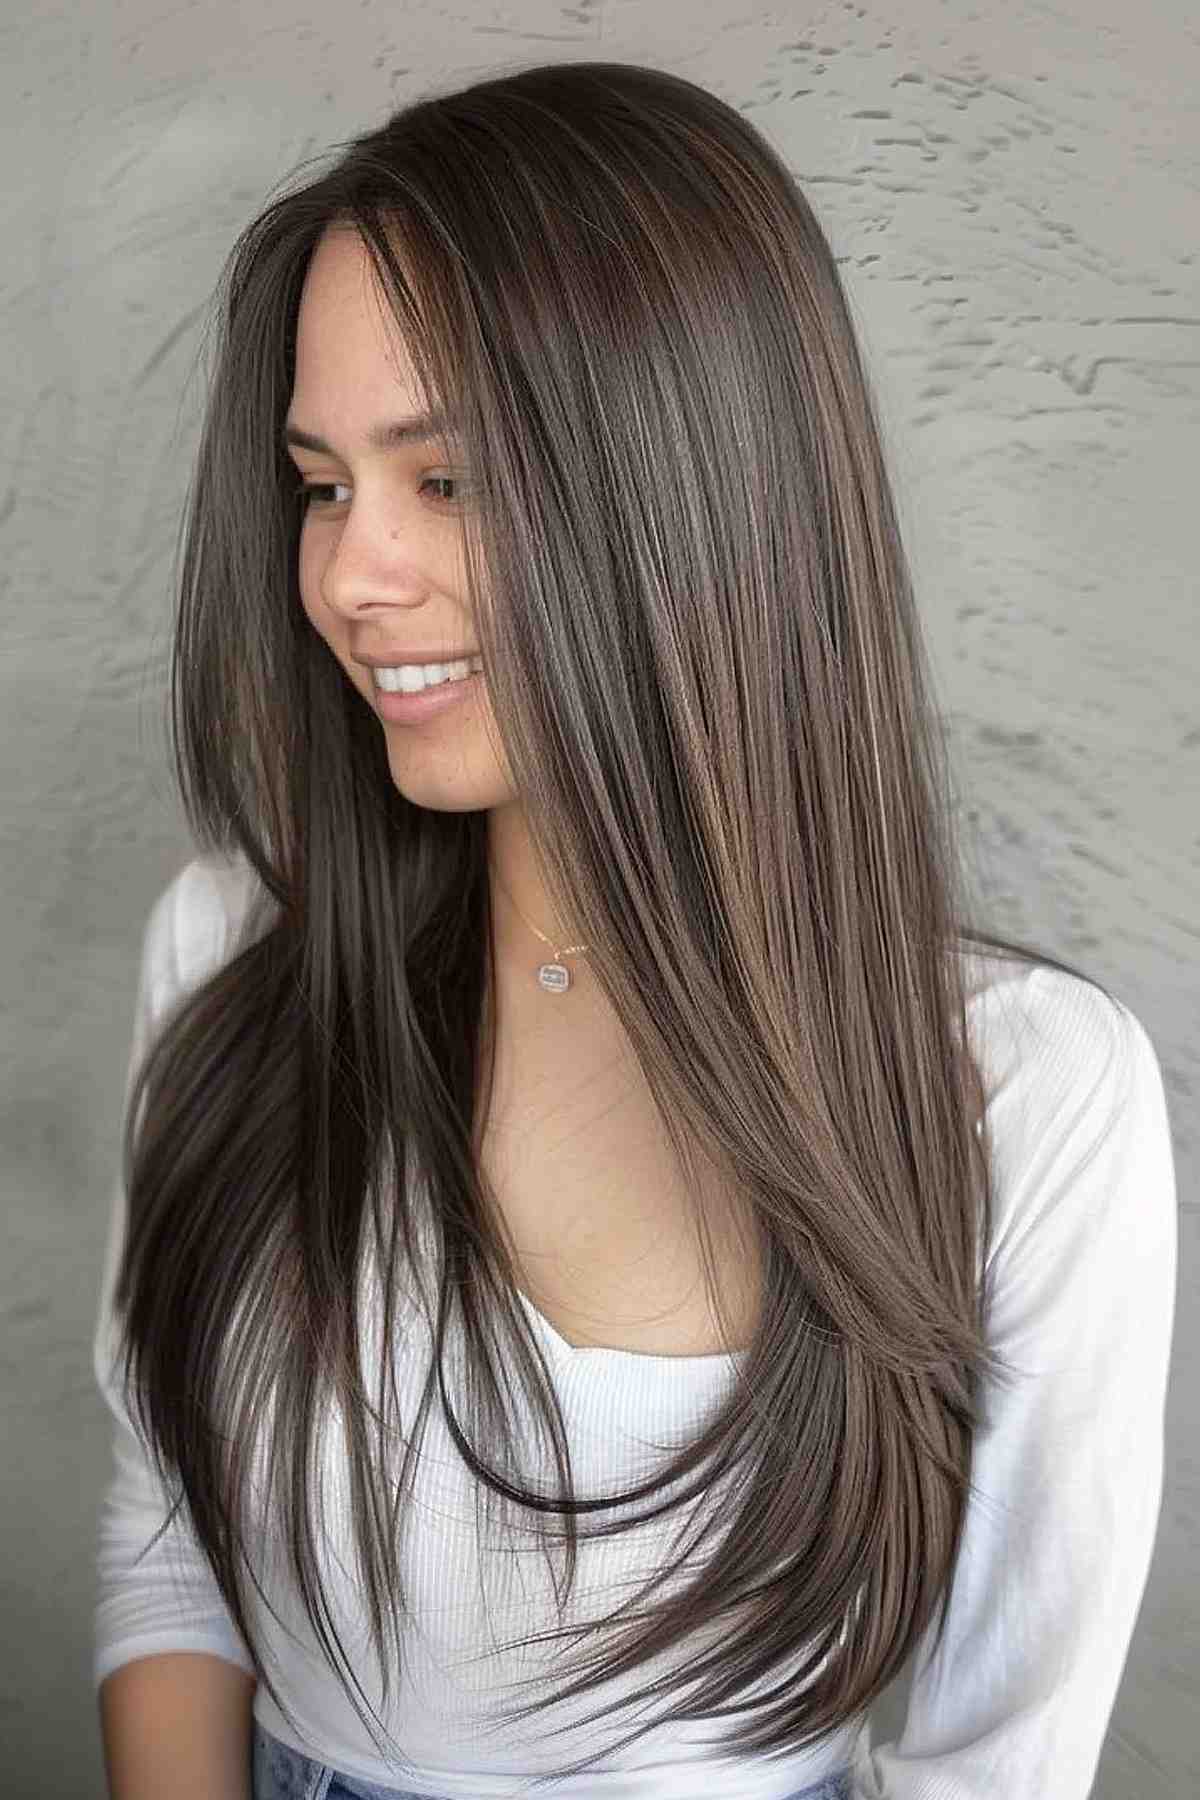 Straight, sleek long hair in a uniform mushroom brown shade with subtle highlights, providing a chic and low-maintenance look.